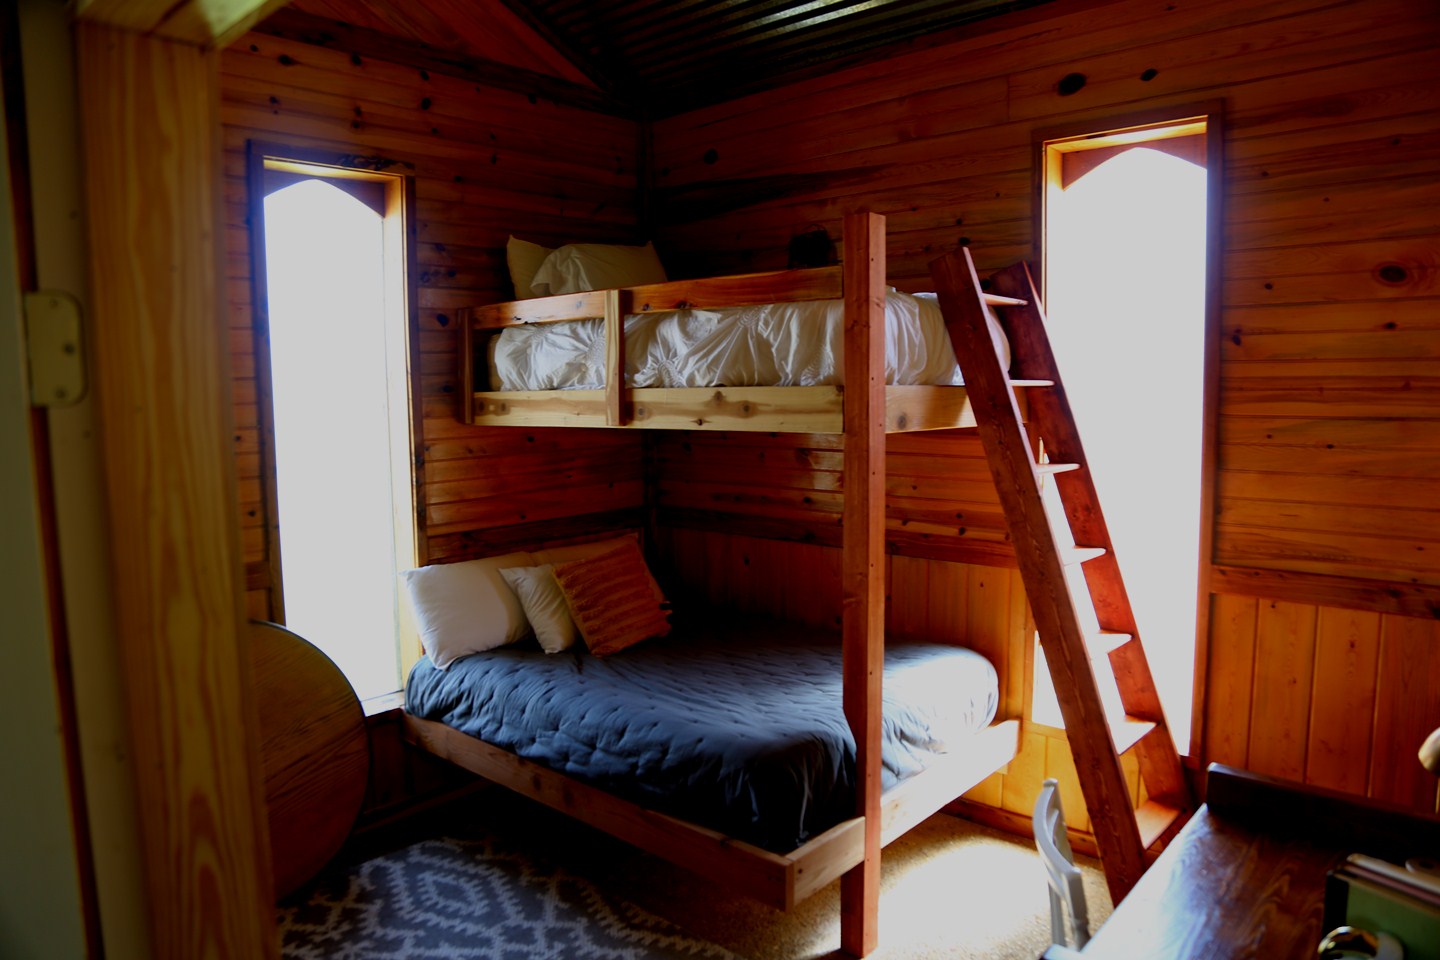 a double-deck bed inside a small room